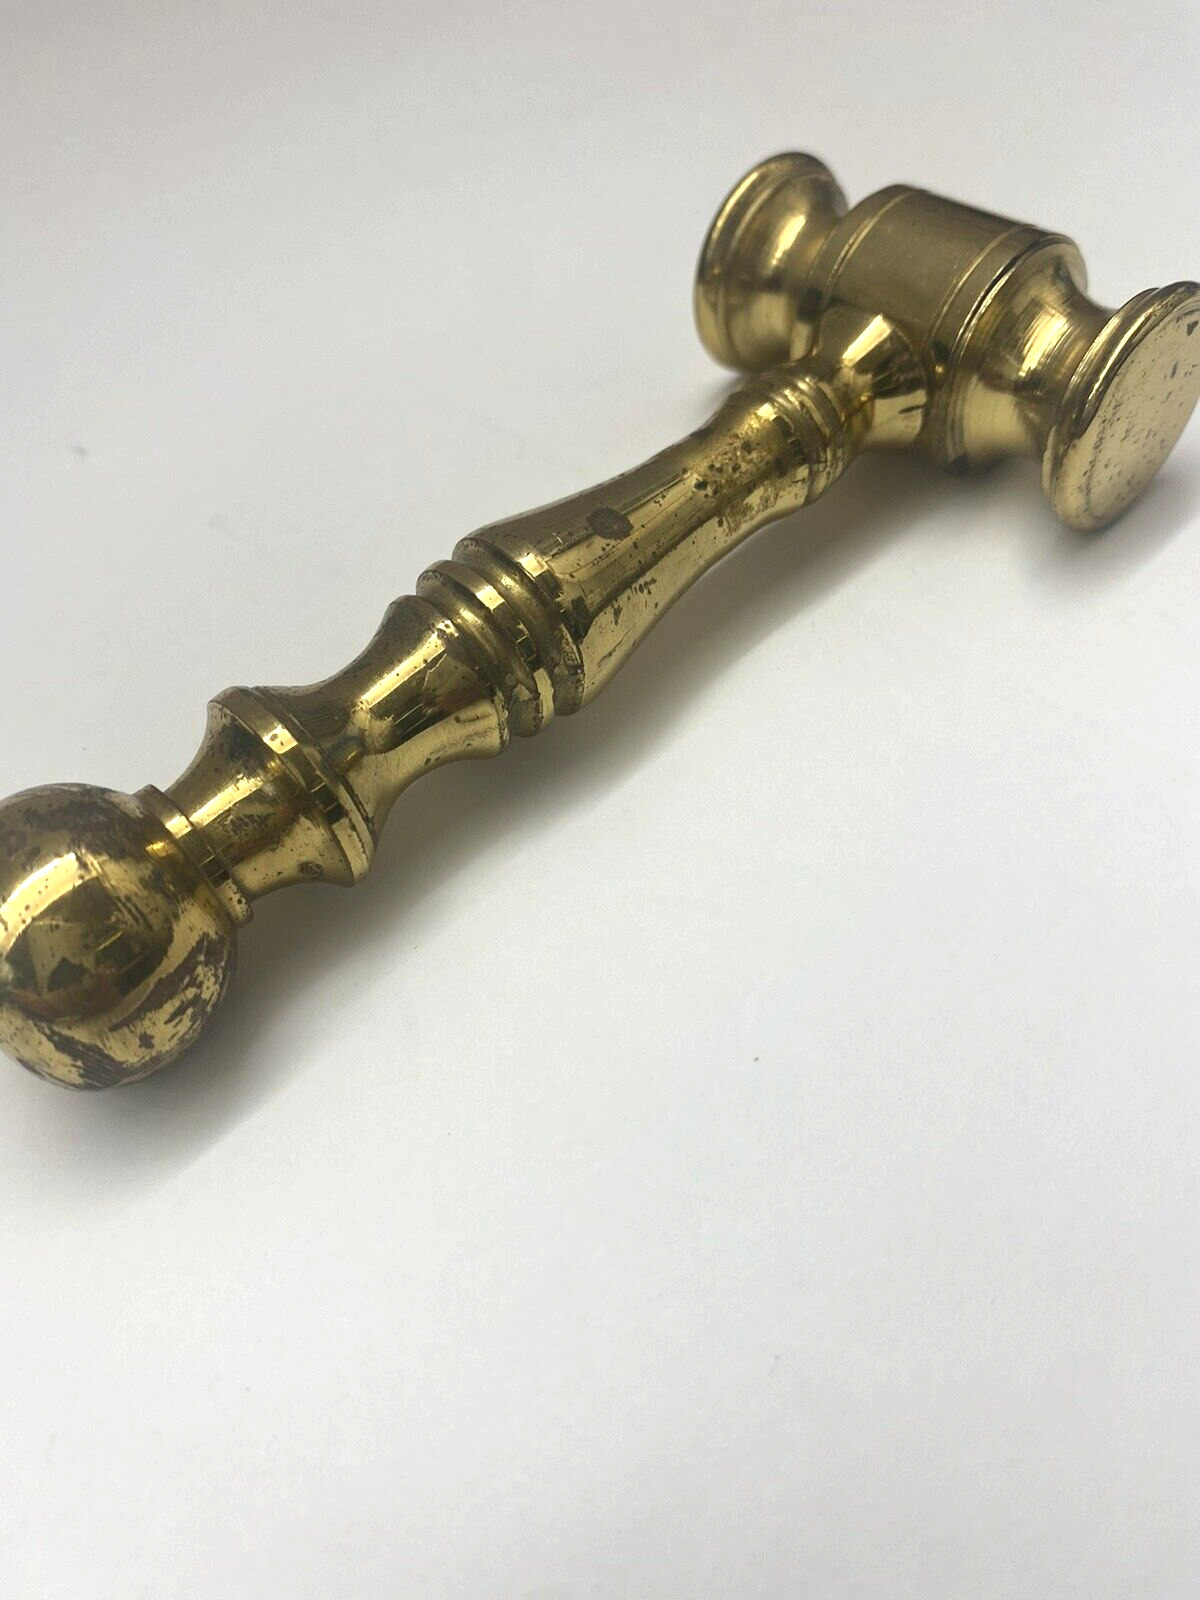 Brass Gavel Small Heavy Paperweight Office Judge Auctioneer Mallet Hammer